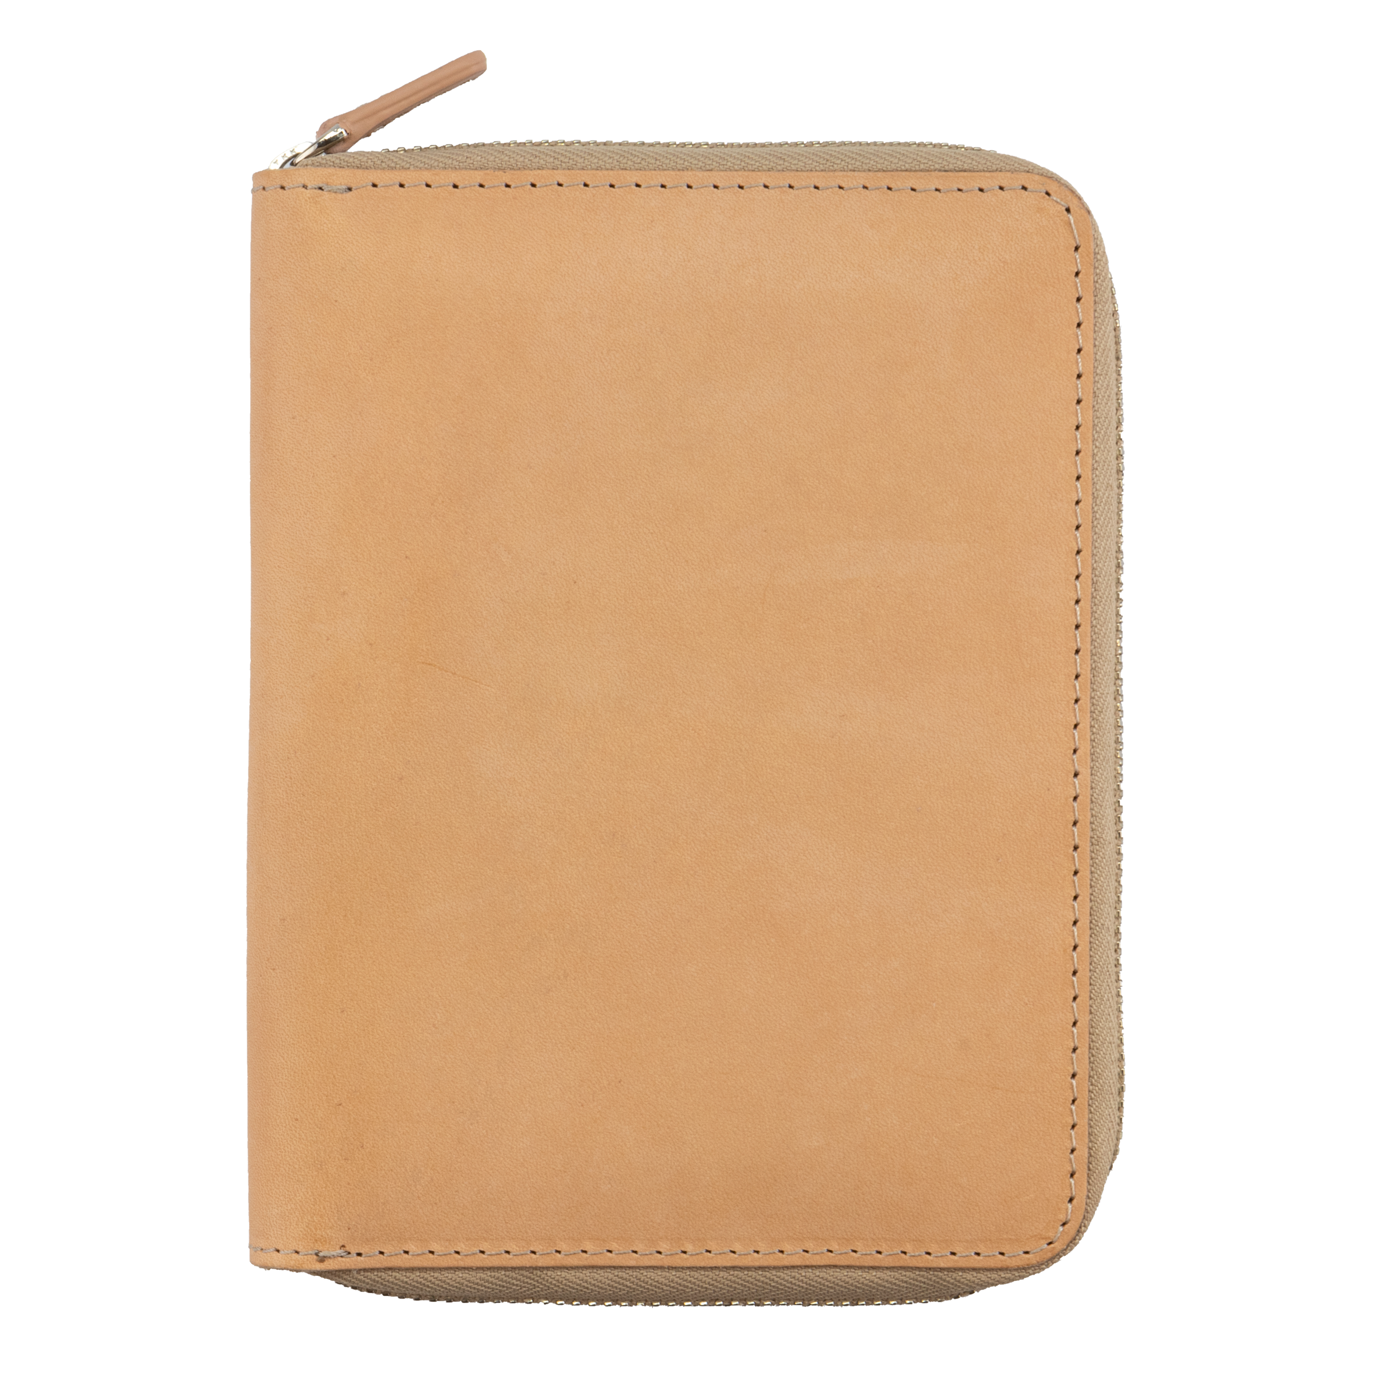 Galen Leather Co. Zippered 5 Slot Pen Case- Undyed Leather